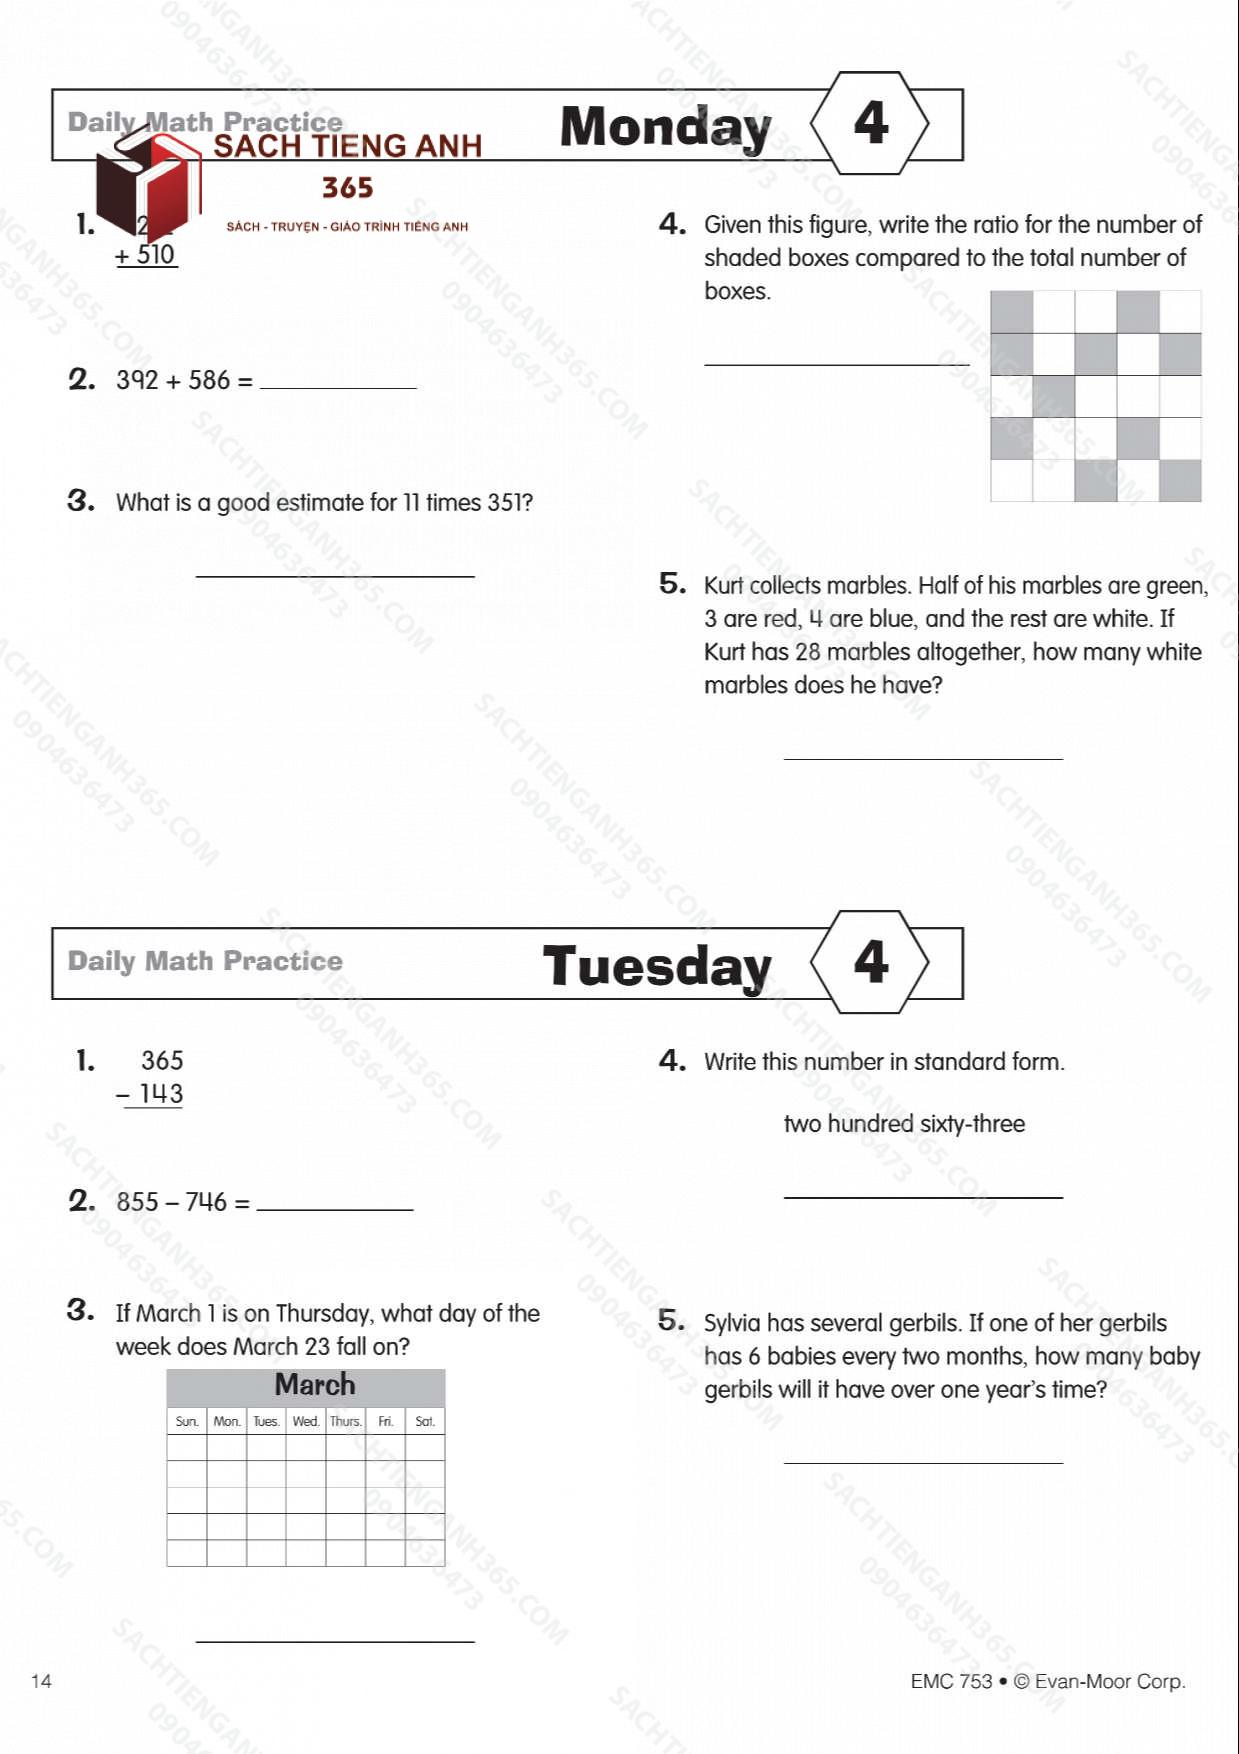 Daily math practice 4 (3)